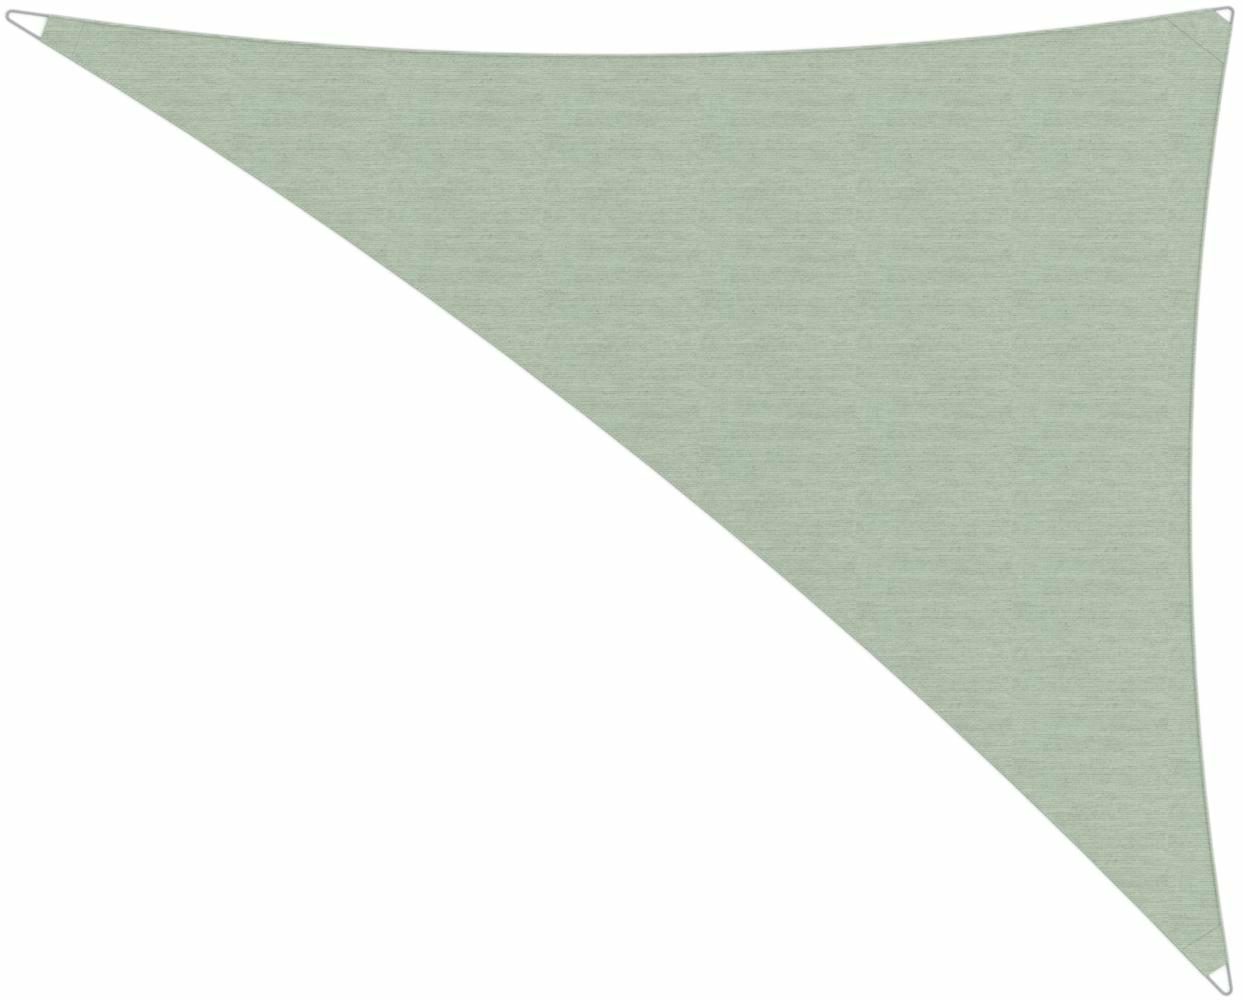 Ingenua shade sail Triangle 4 x 5 x 6,4 m, for outdoor use. Colour of the fabric shade sail Mint.